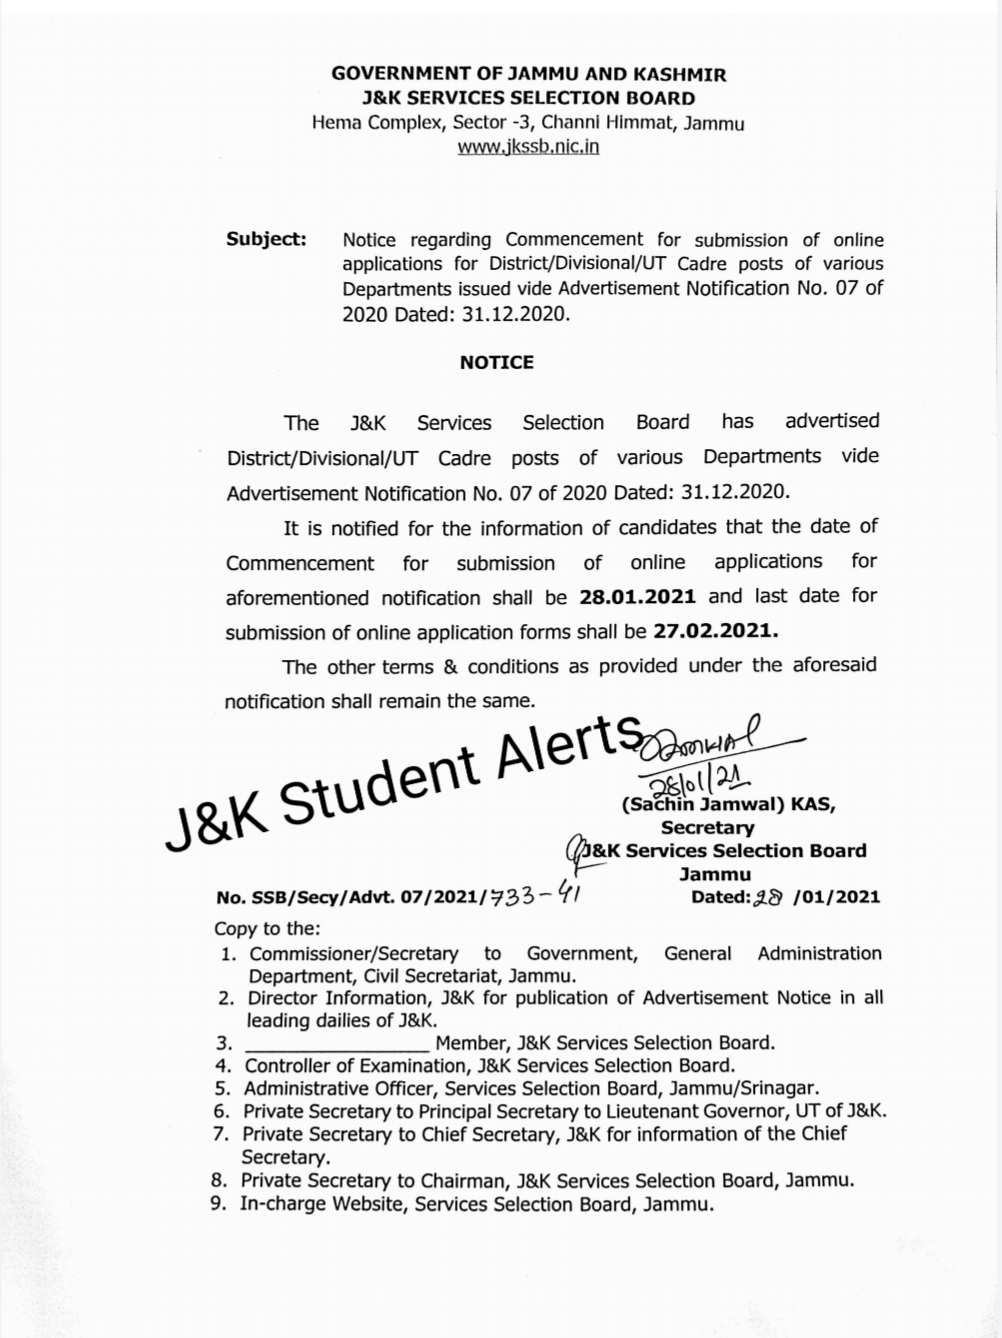 1611847329 556 JKSSB Notice regarding commencement for submission of online applications for